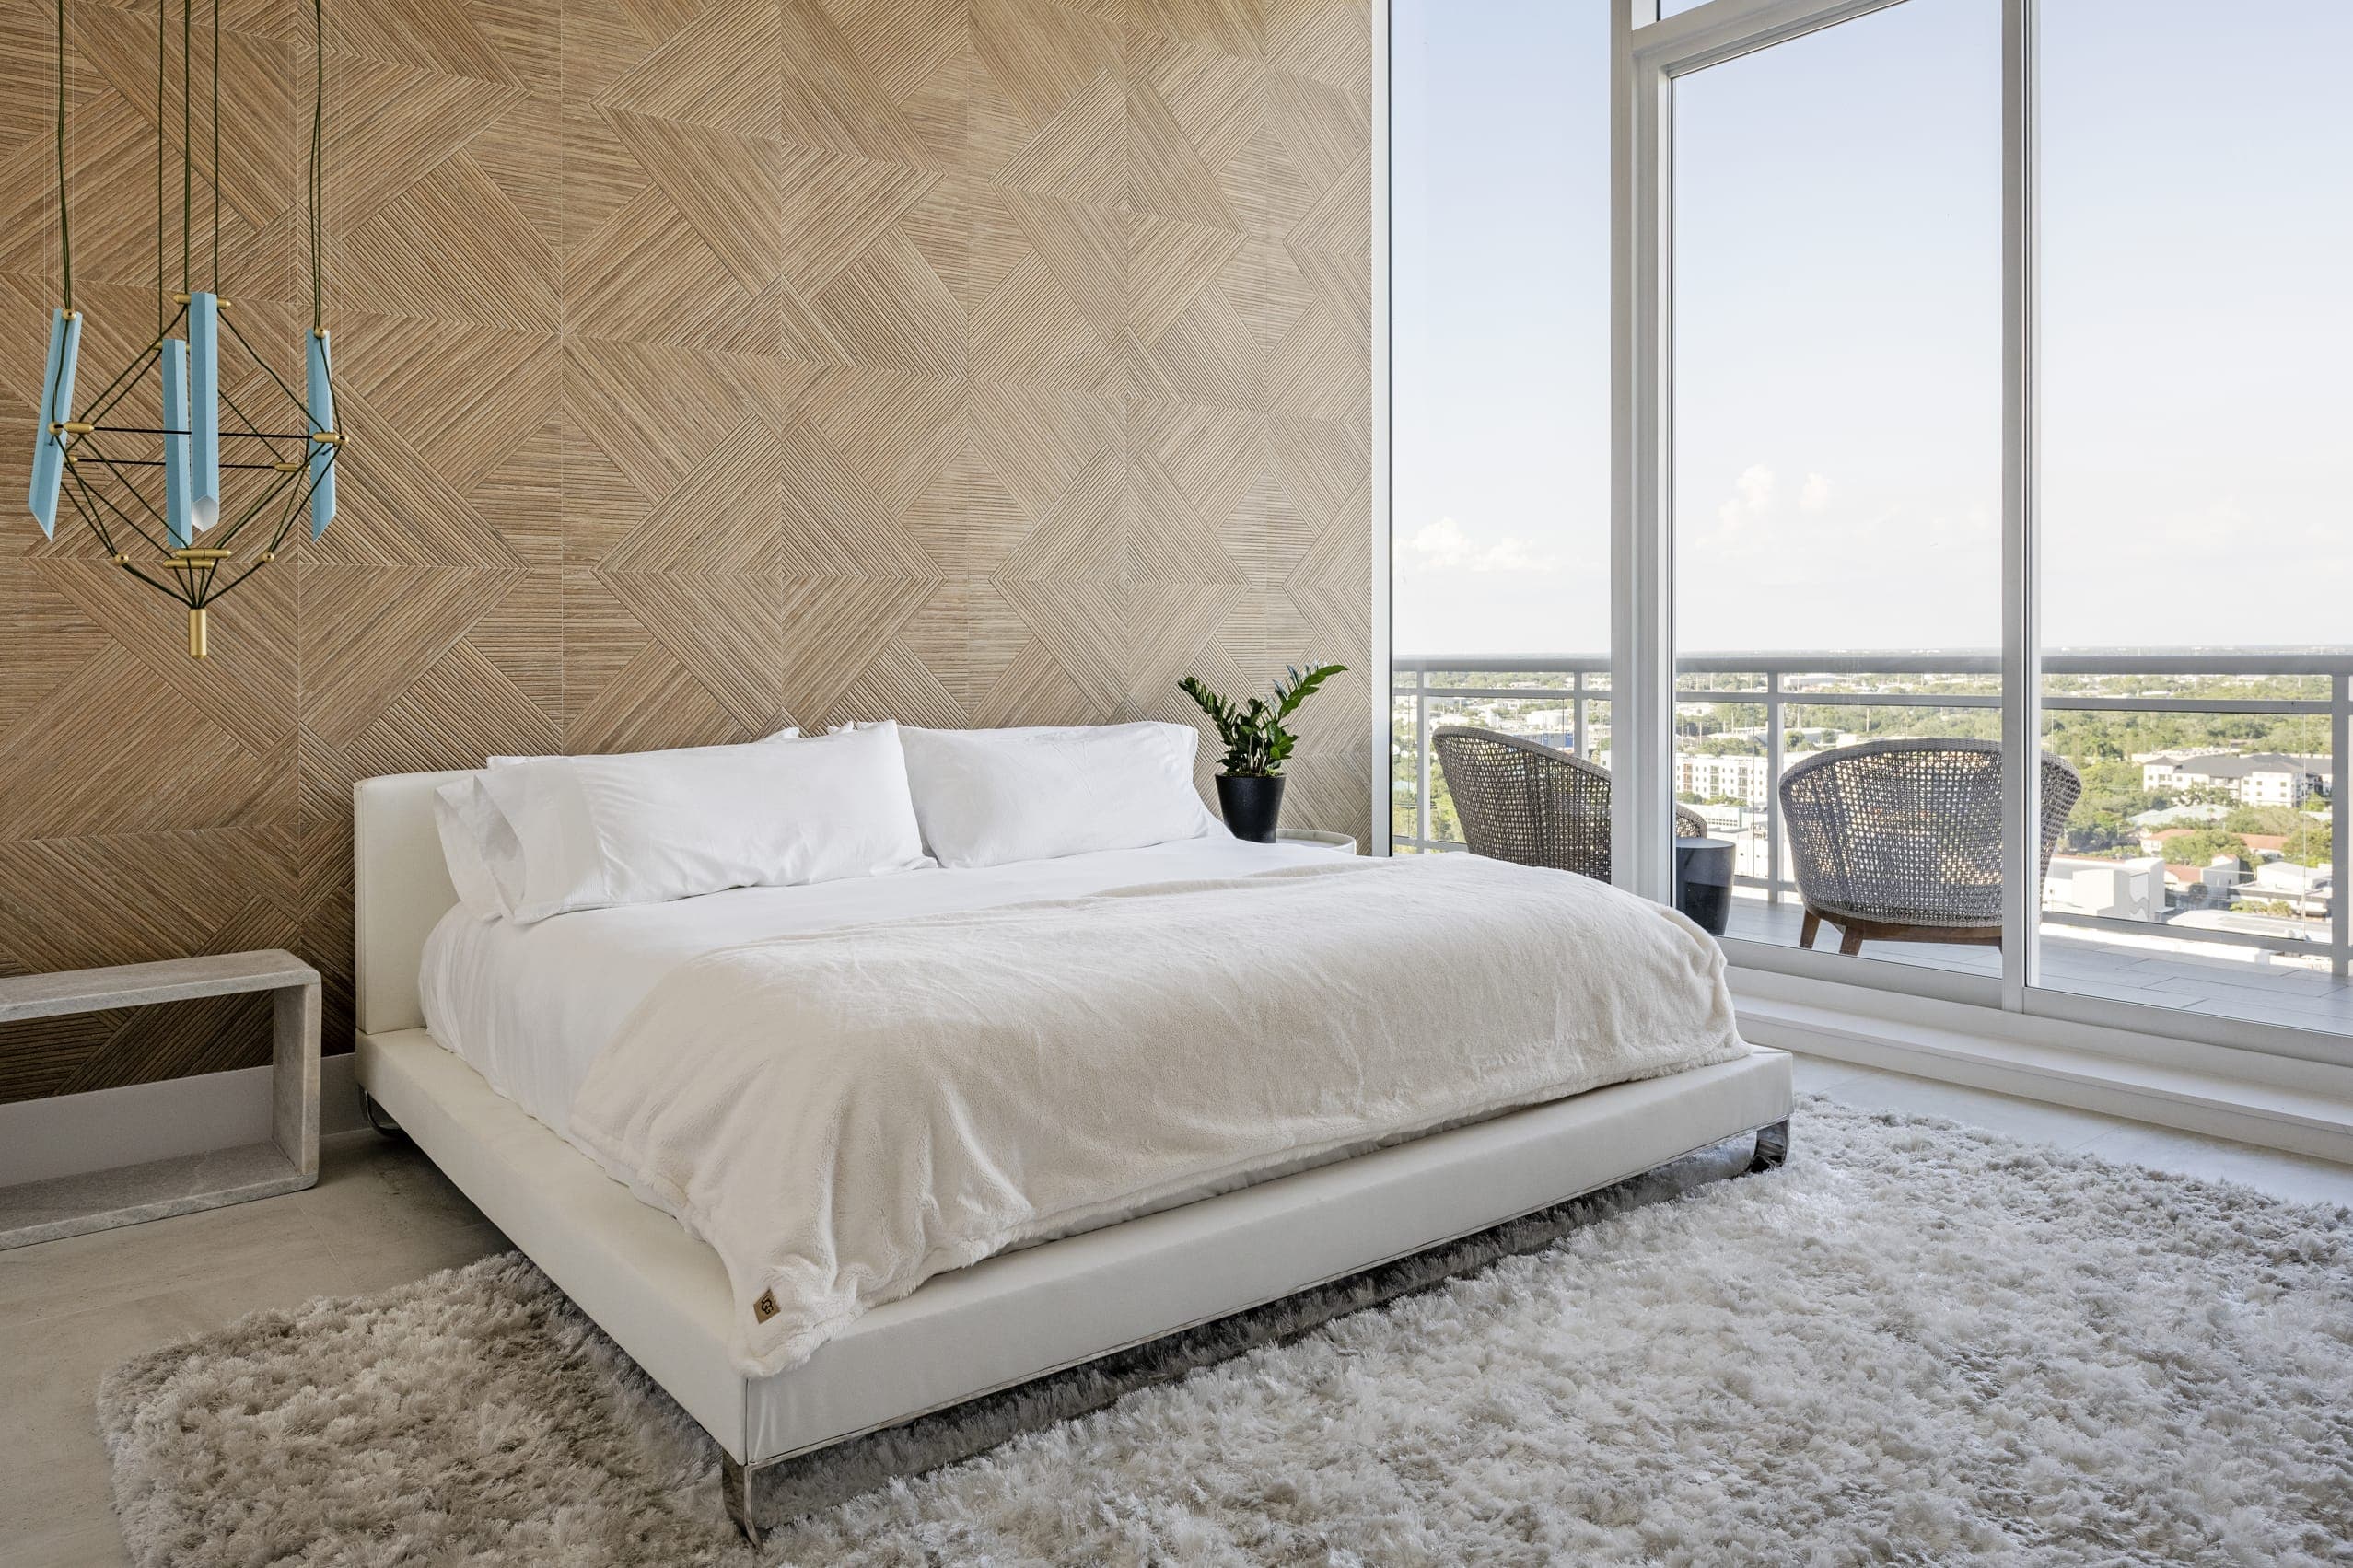 Jkl Penthouse The Blvd Guest Bedroom Wood Pattern Accent Wall